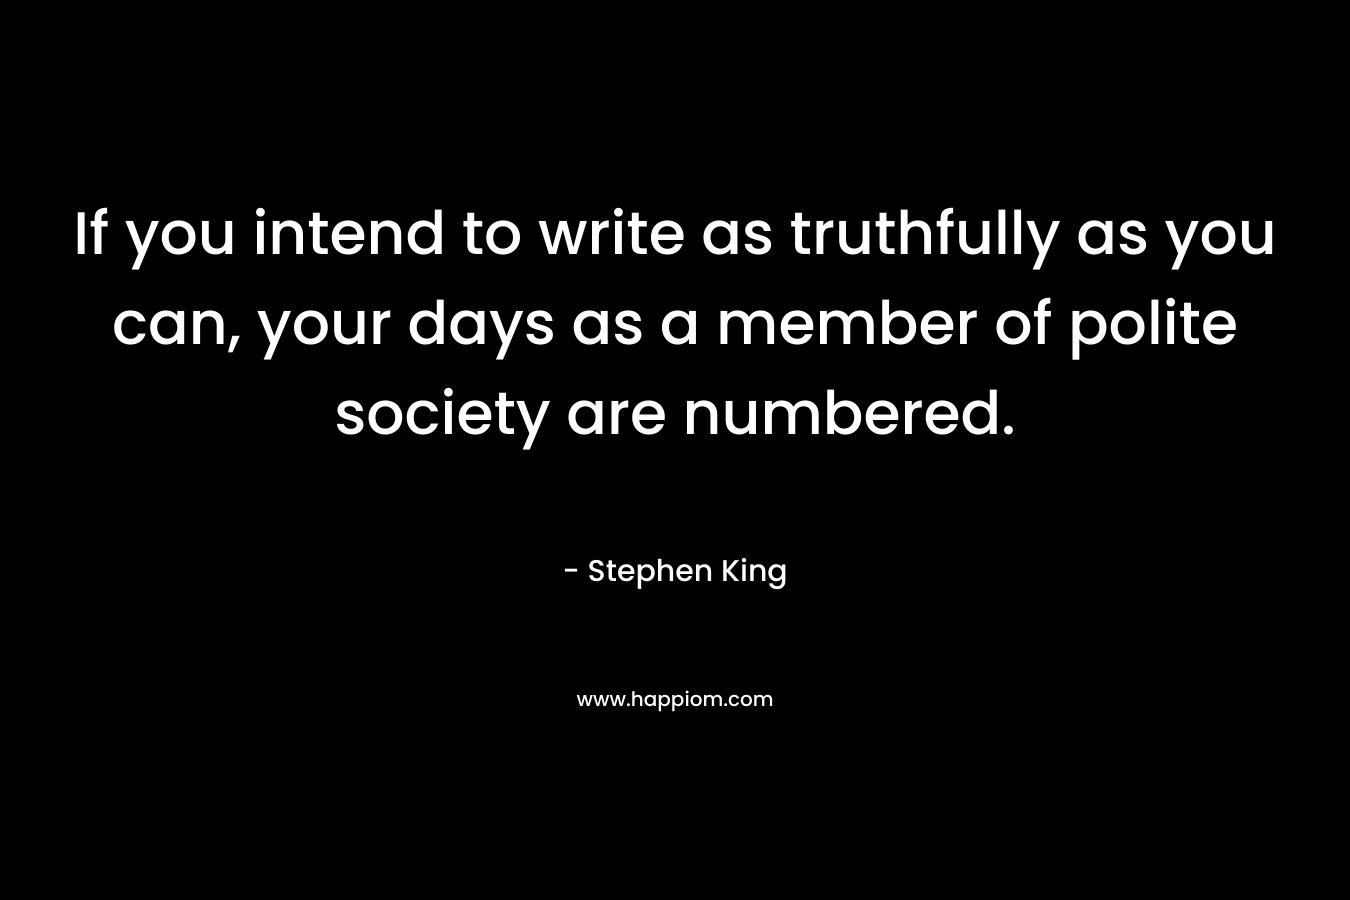 If you intend to write as truthfully as you can, your days as a member of polite society are numbered. – Stephen King